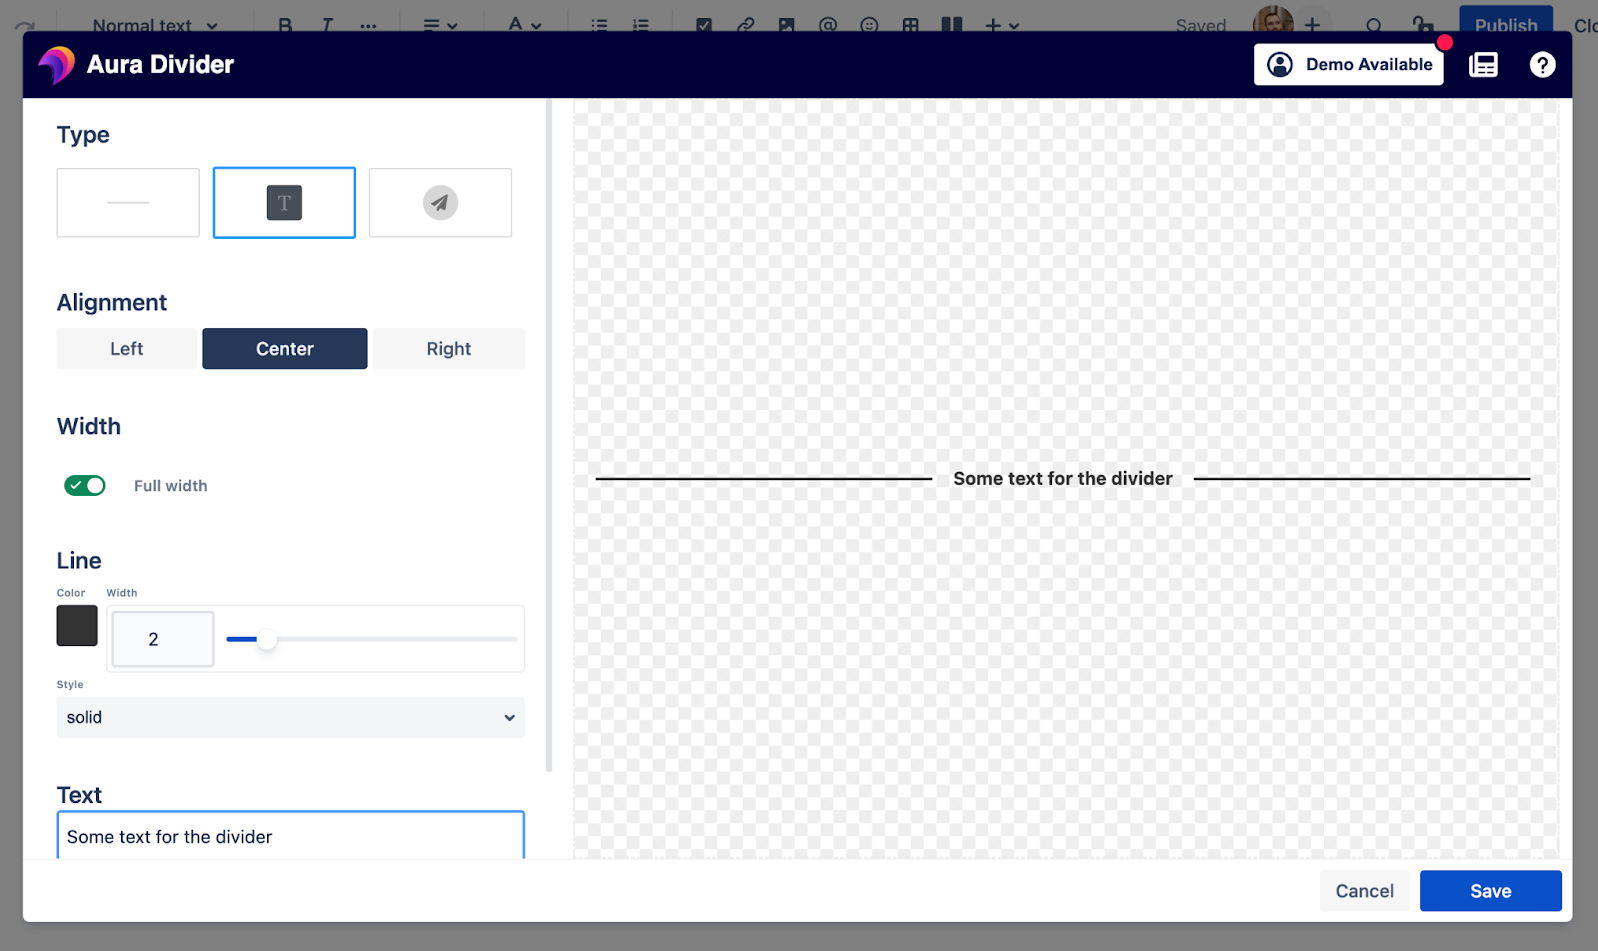 The Best Way to Share Content in Confluence Cloud - Aura Divider macro being set up